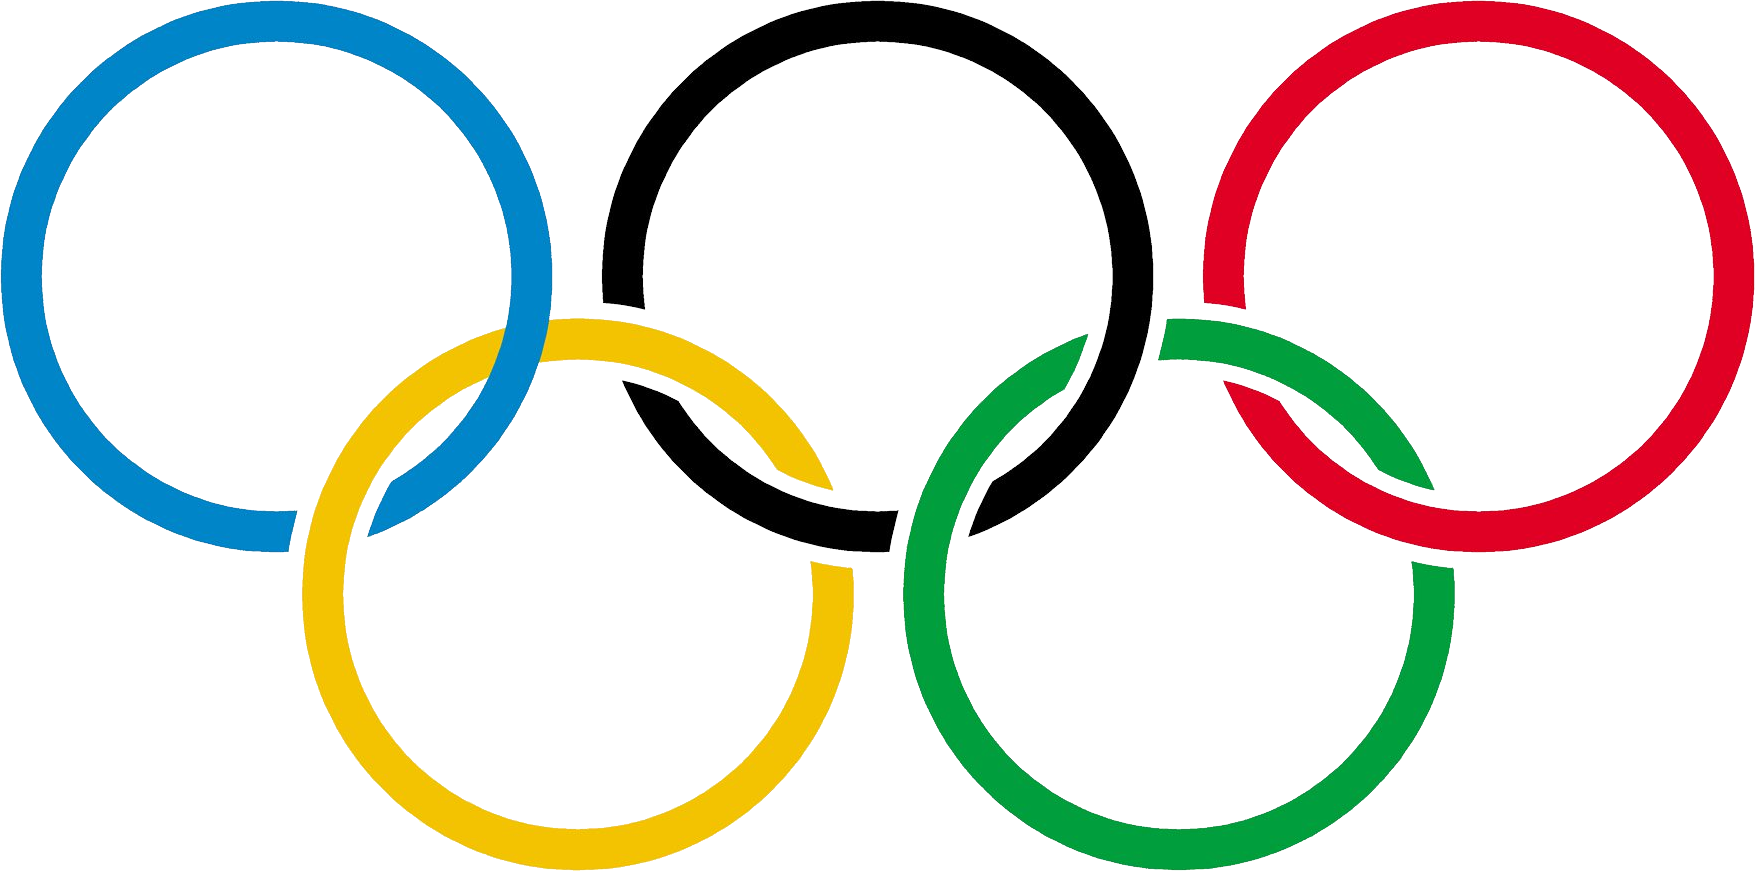 Olympic rings logo PNG images 